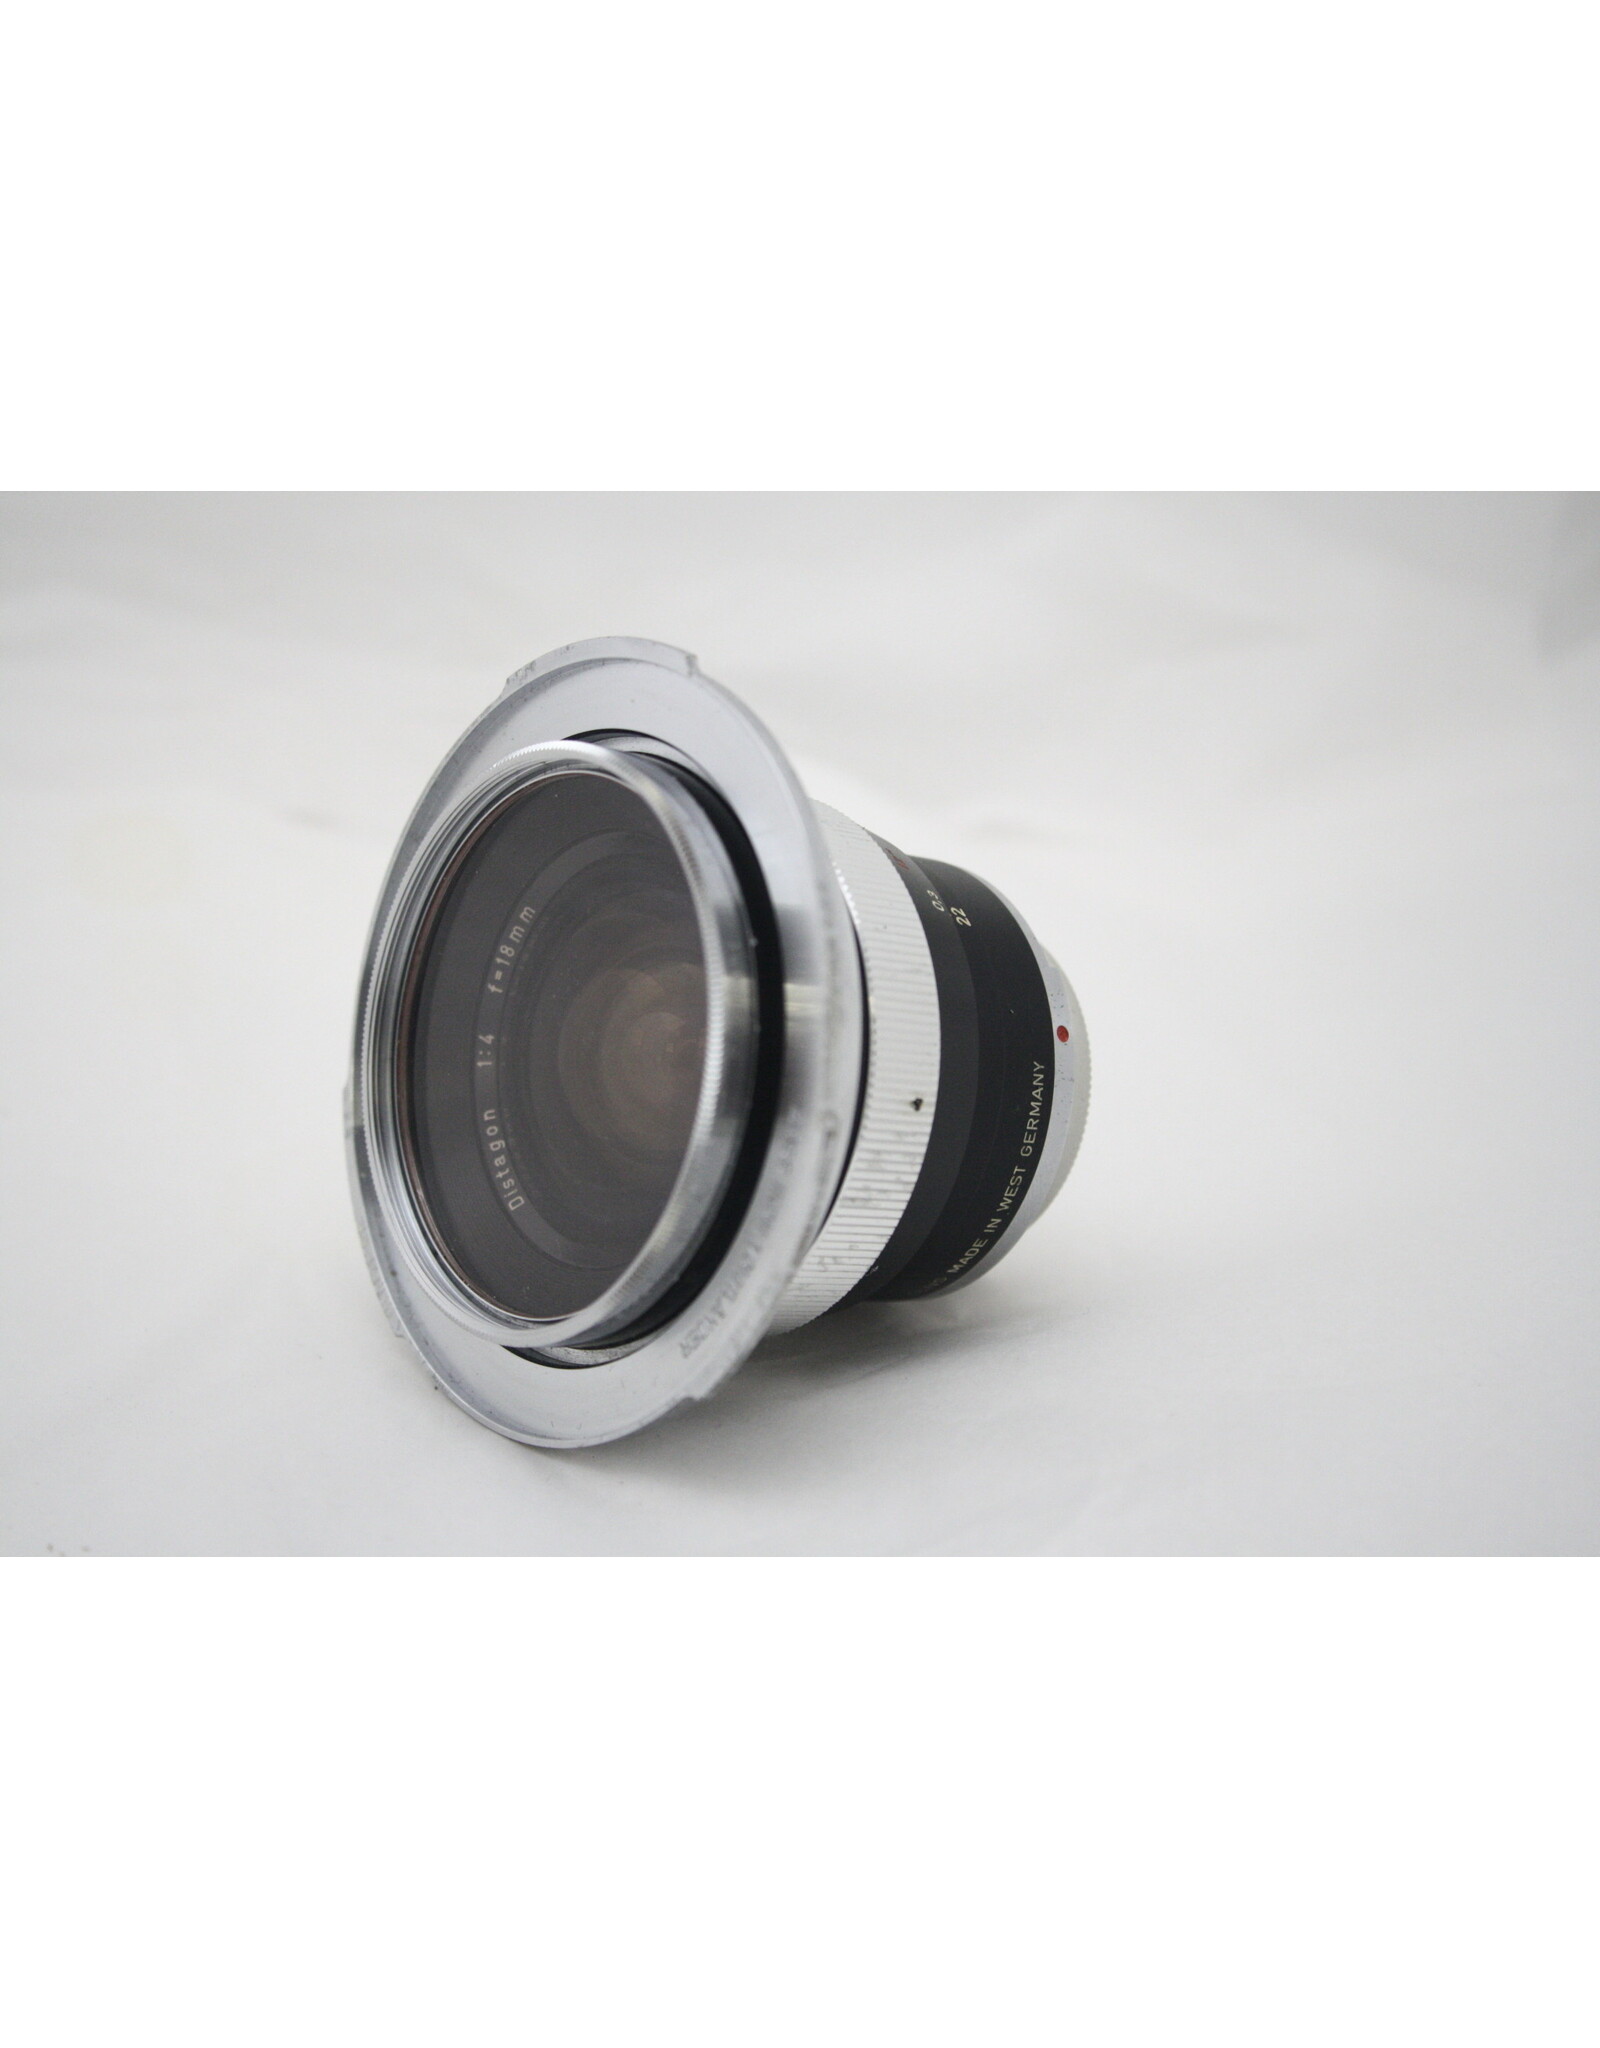 Carl Zeiss Carl Zeiss Distagon 18mm f4 Lens with UV Filter, Original Case, and Caps S/N 4492712